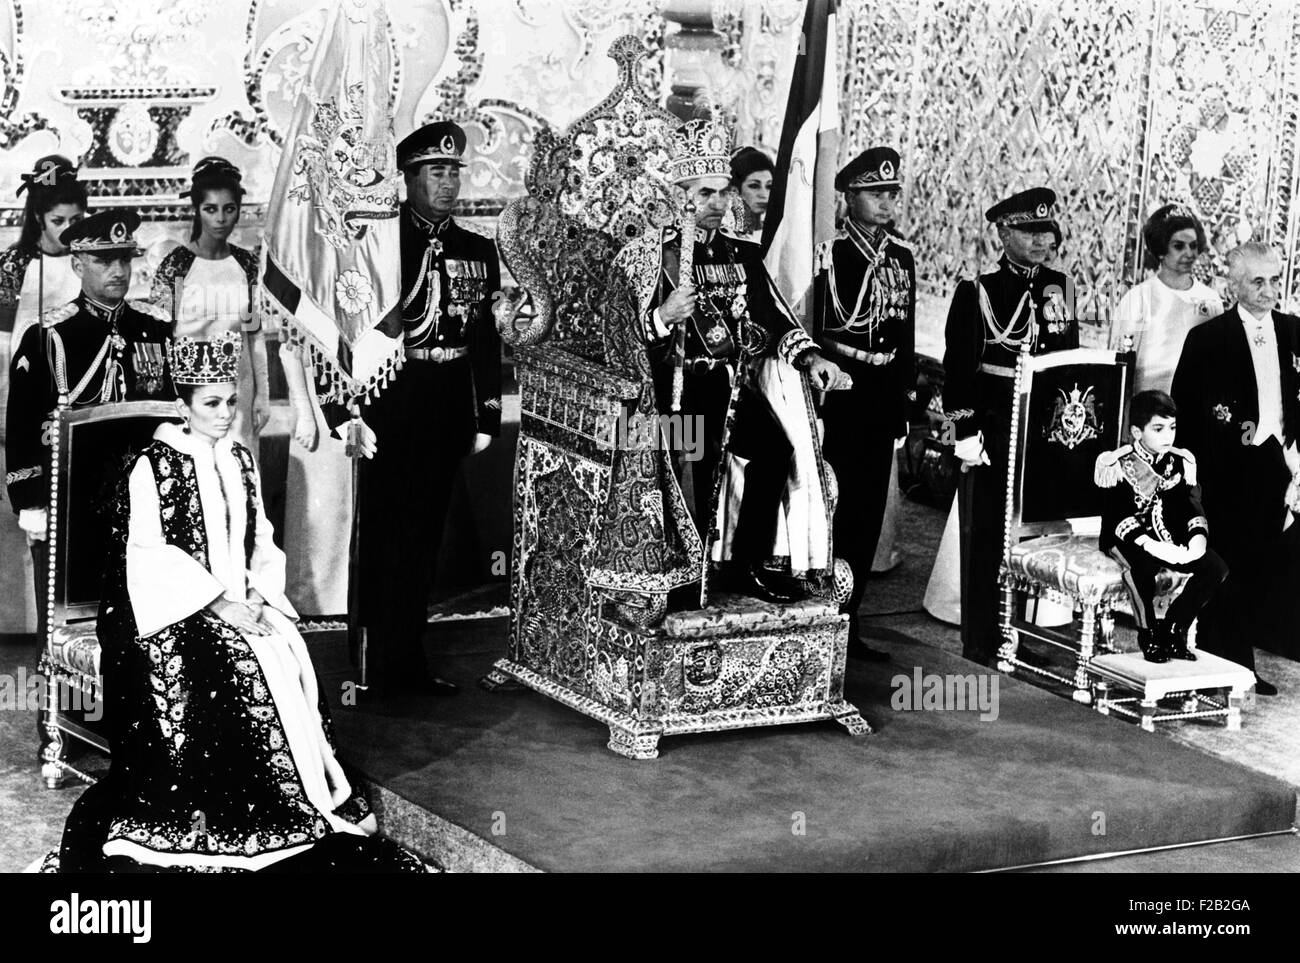 Shah of Iran seated on the Peacock Throne, flanked by Empress Farah and Crown Prince Reza. Oct. 26, 1967. (CSU 2015 8 522) Stock Photo